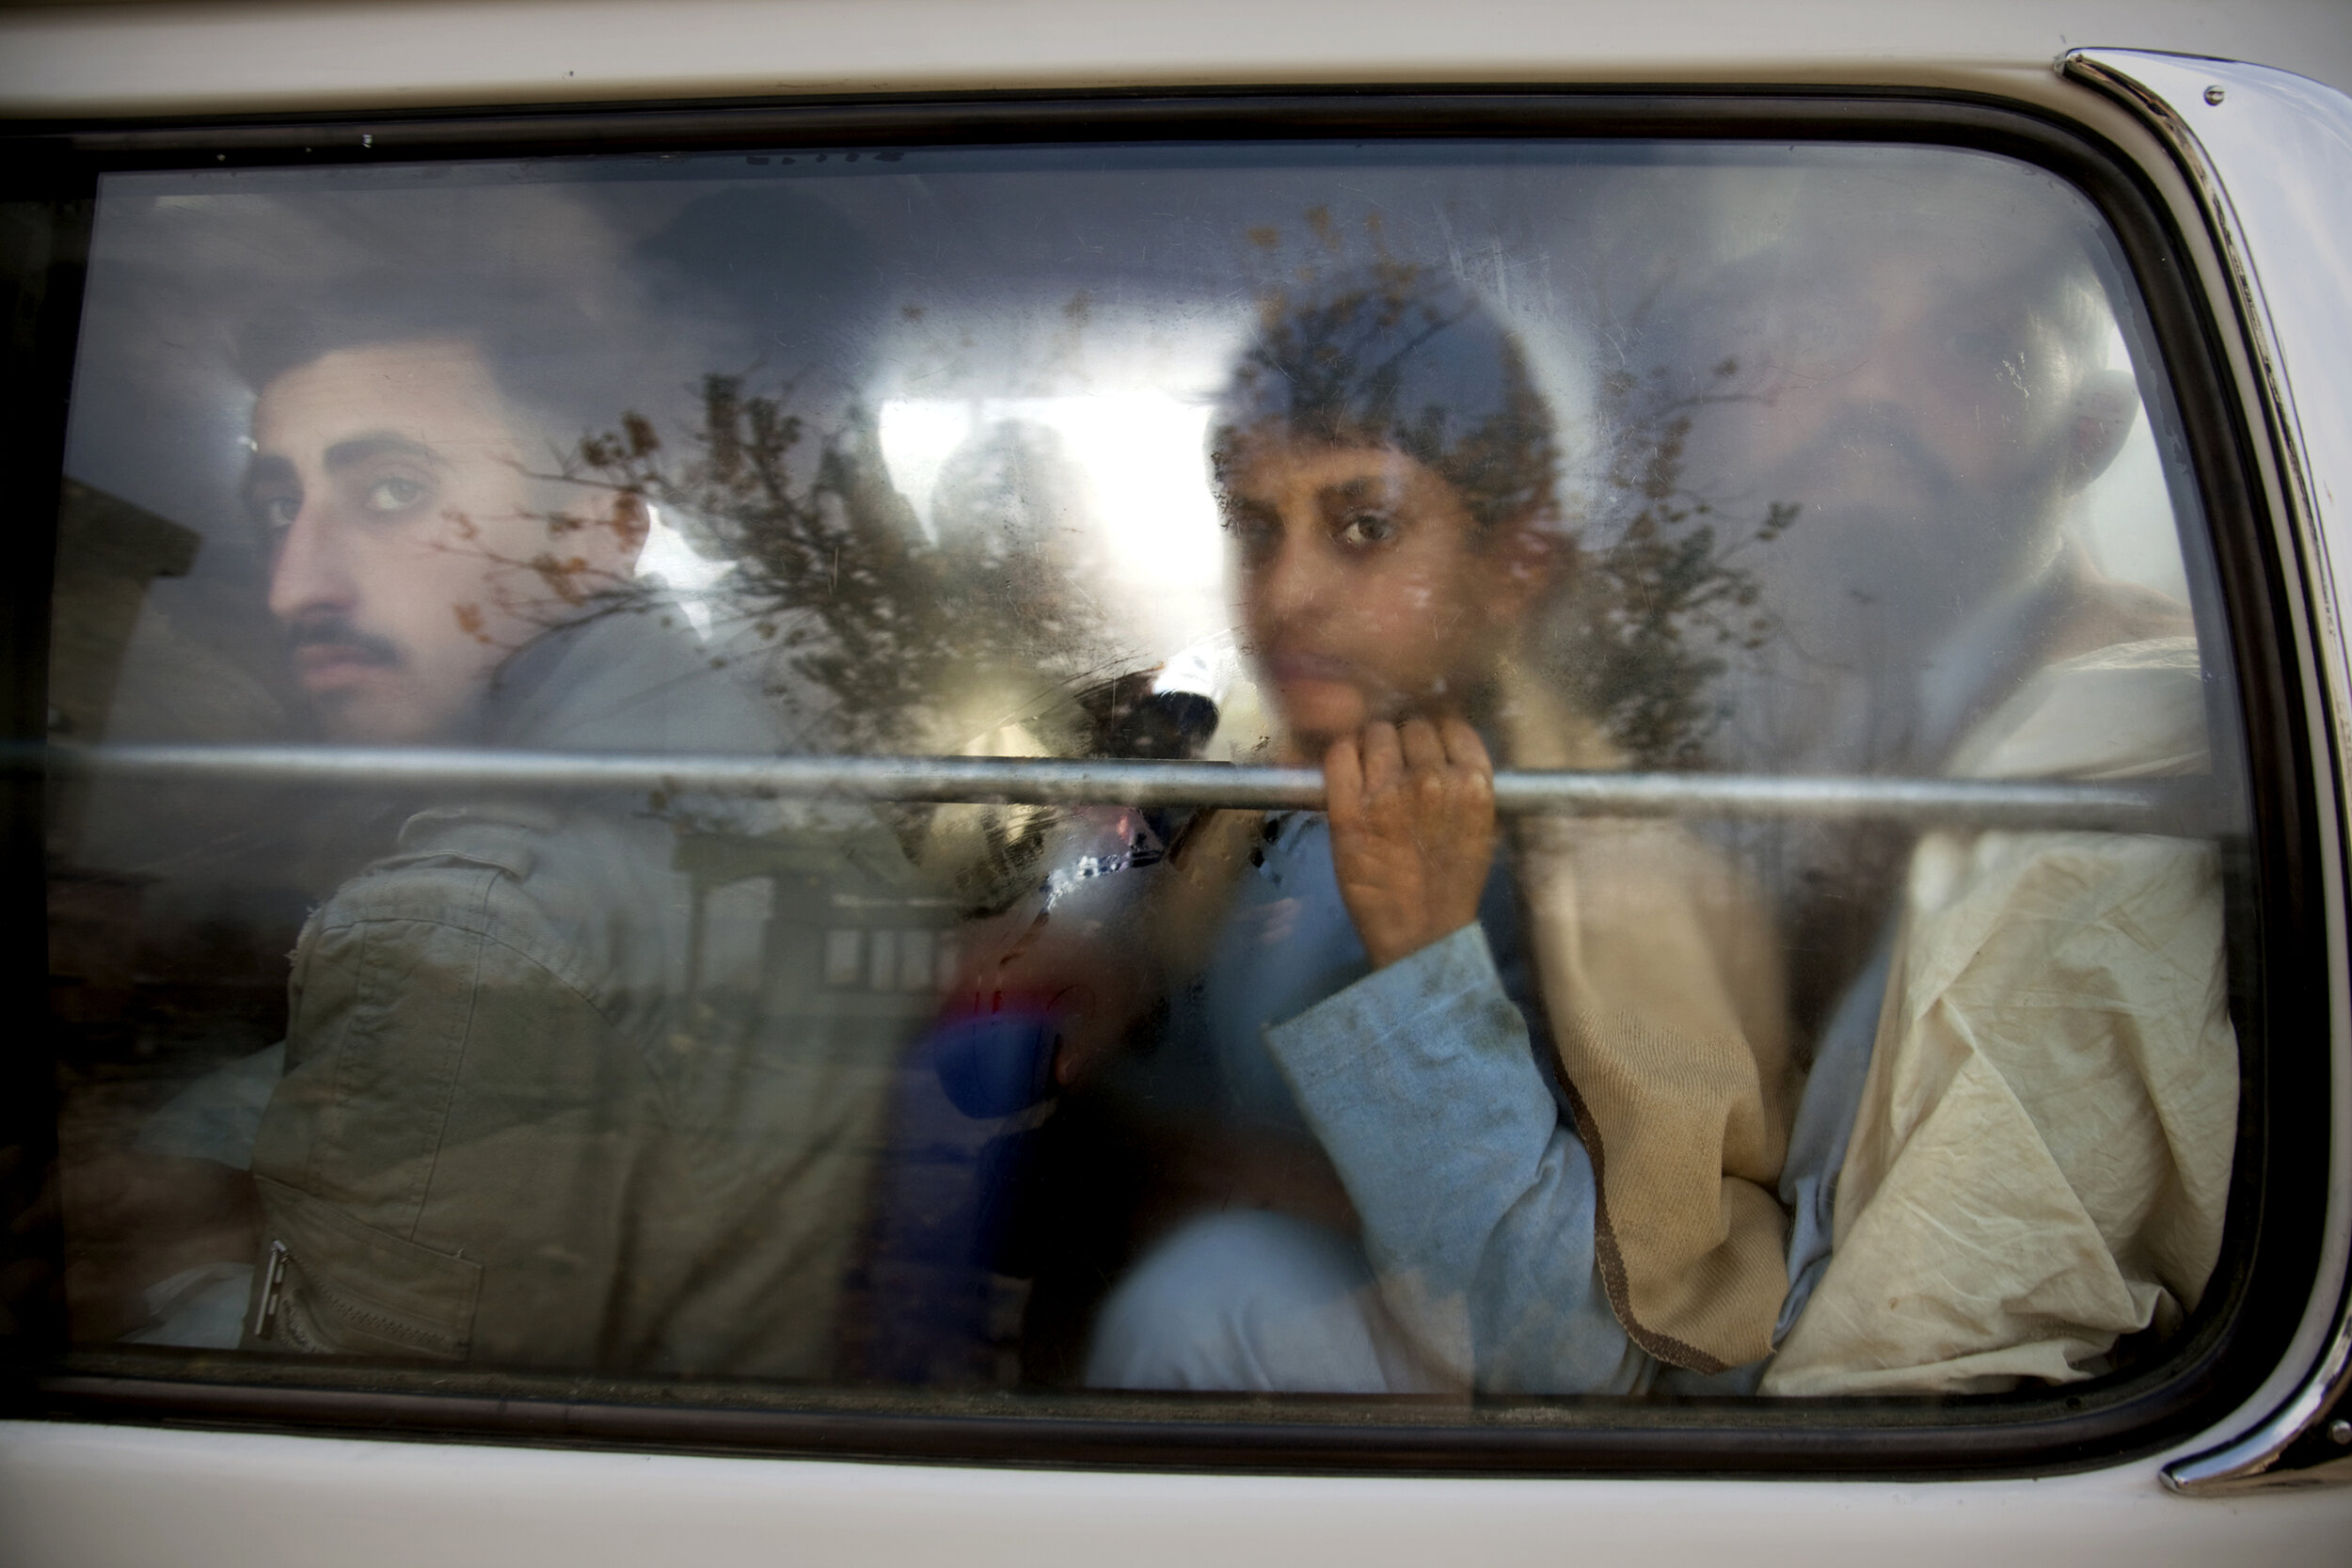  Peering through the glass, travelers await inspection at a Pakistani Army security checkpoint in Mingora and neighboring areas in the Swat Valley, Pakistan. 2009 